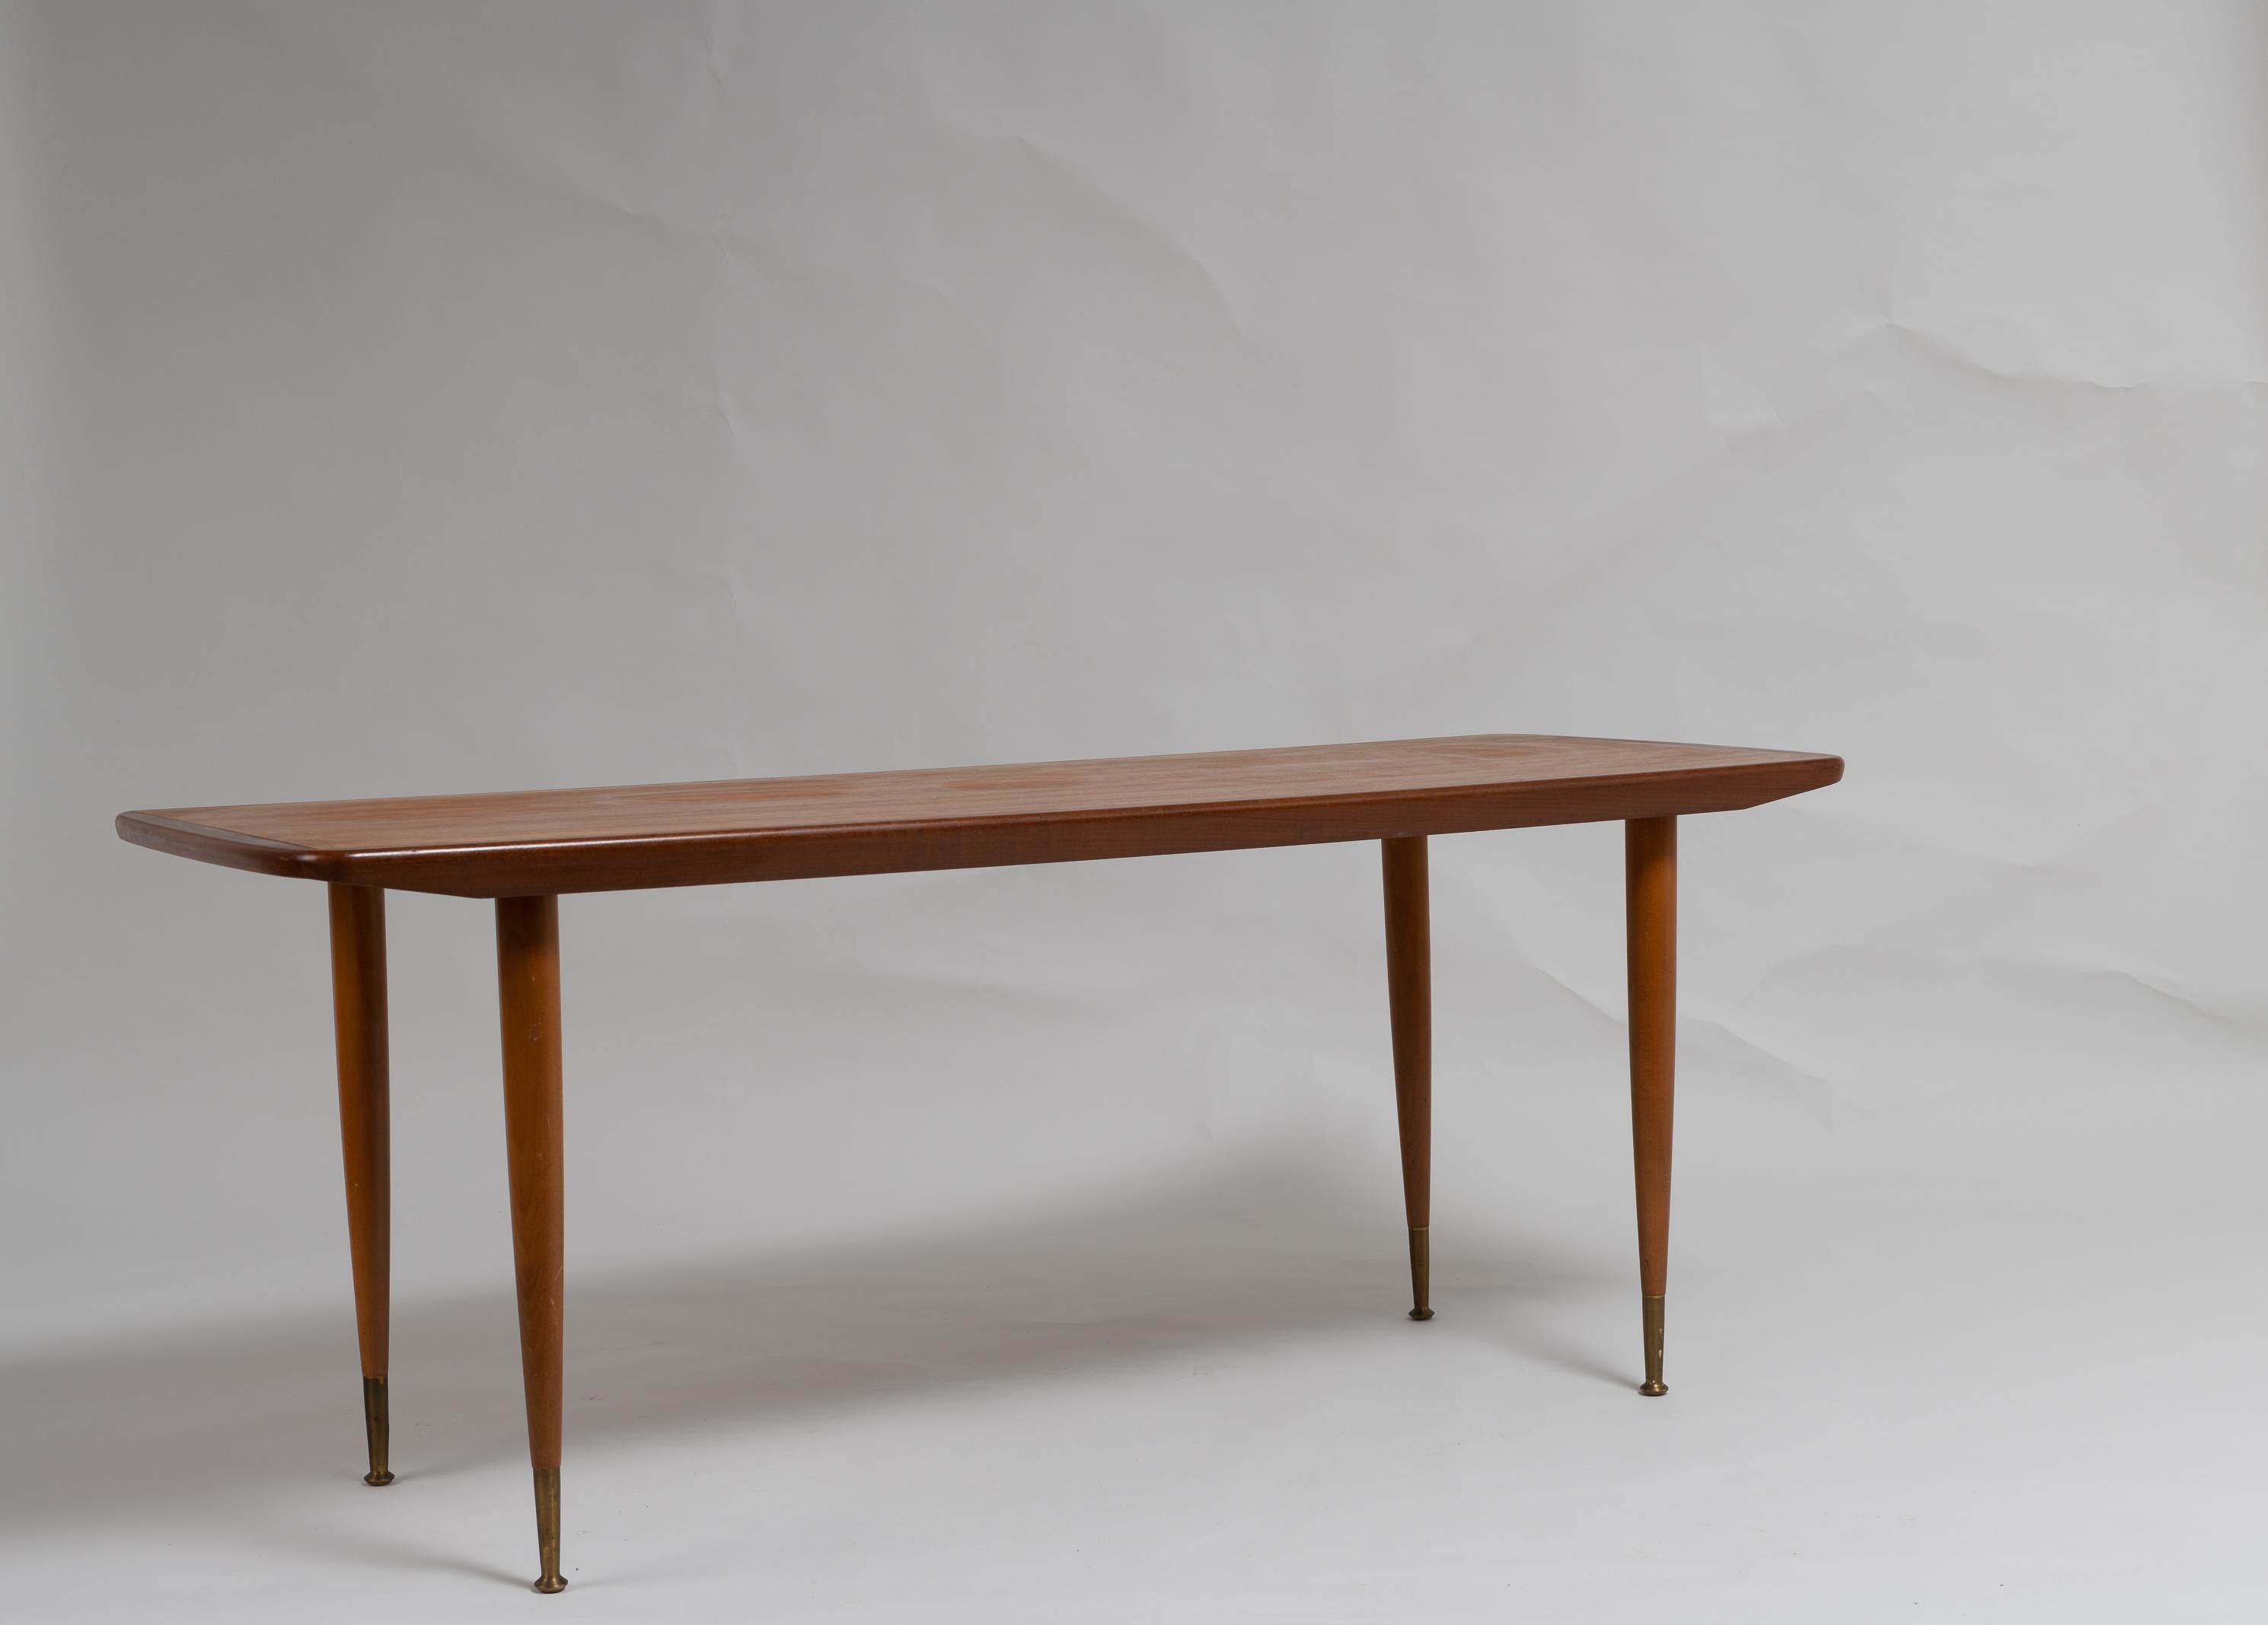 Swedish Scandinavian modern teak table from the 1960s. The coffee table has round slider legs with brass finishes. Good vintage condition consistent with age and use. The table top has some smaller scratches.
 